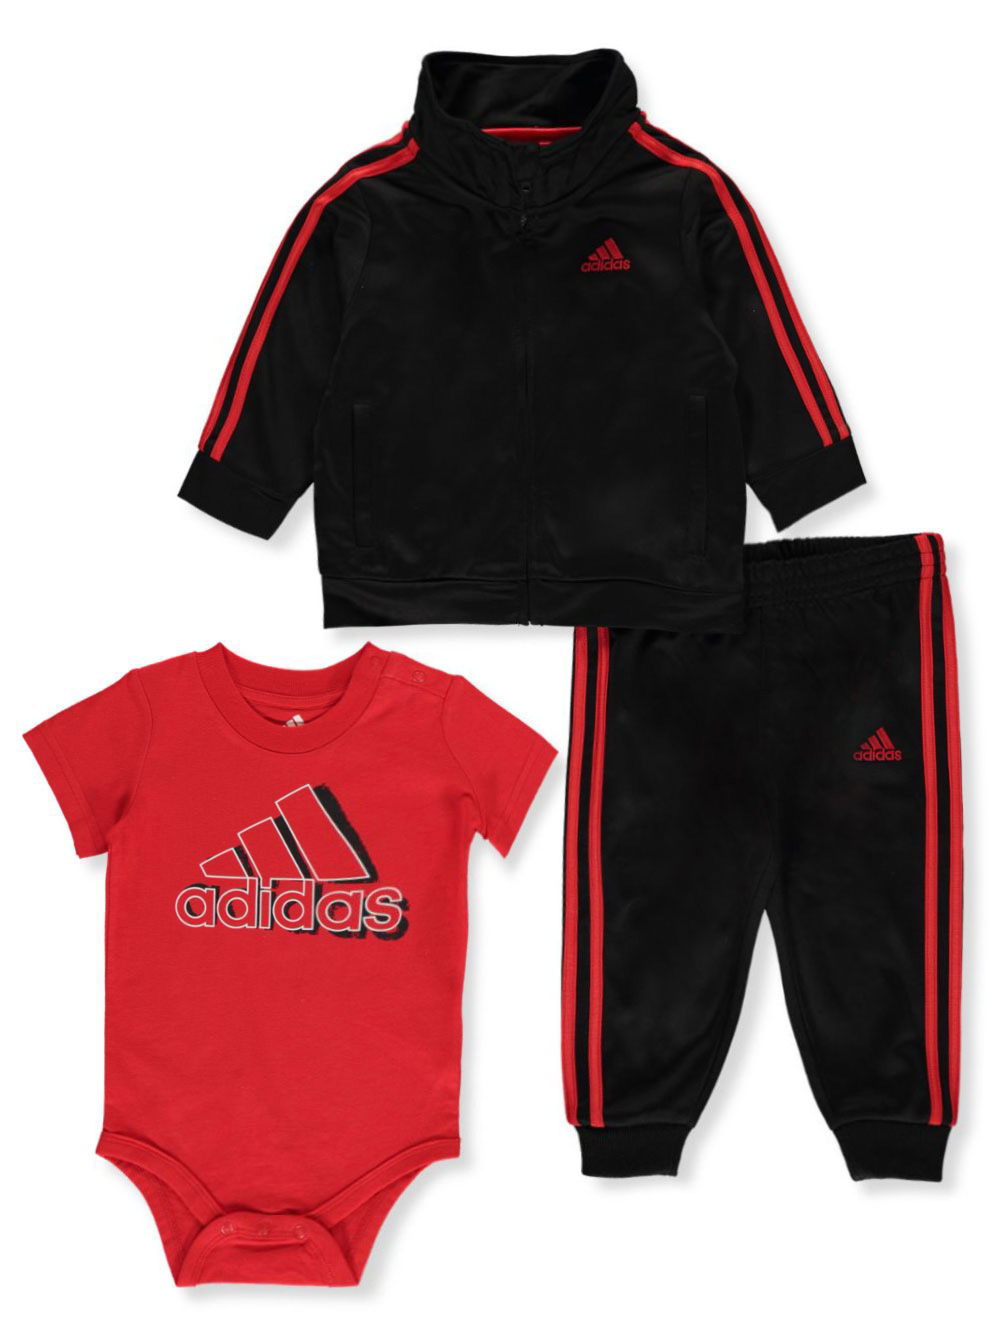 Boys Black and Red Active Sets